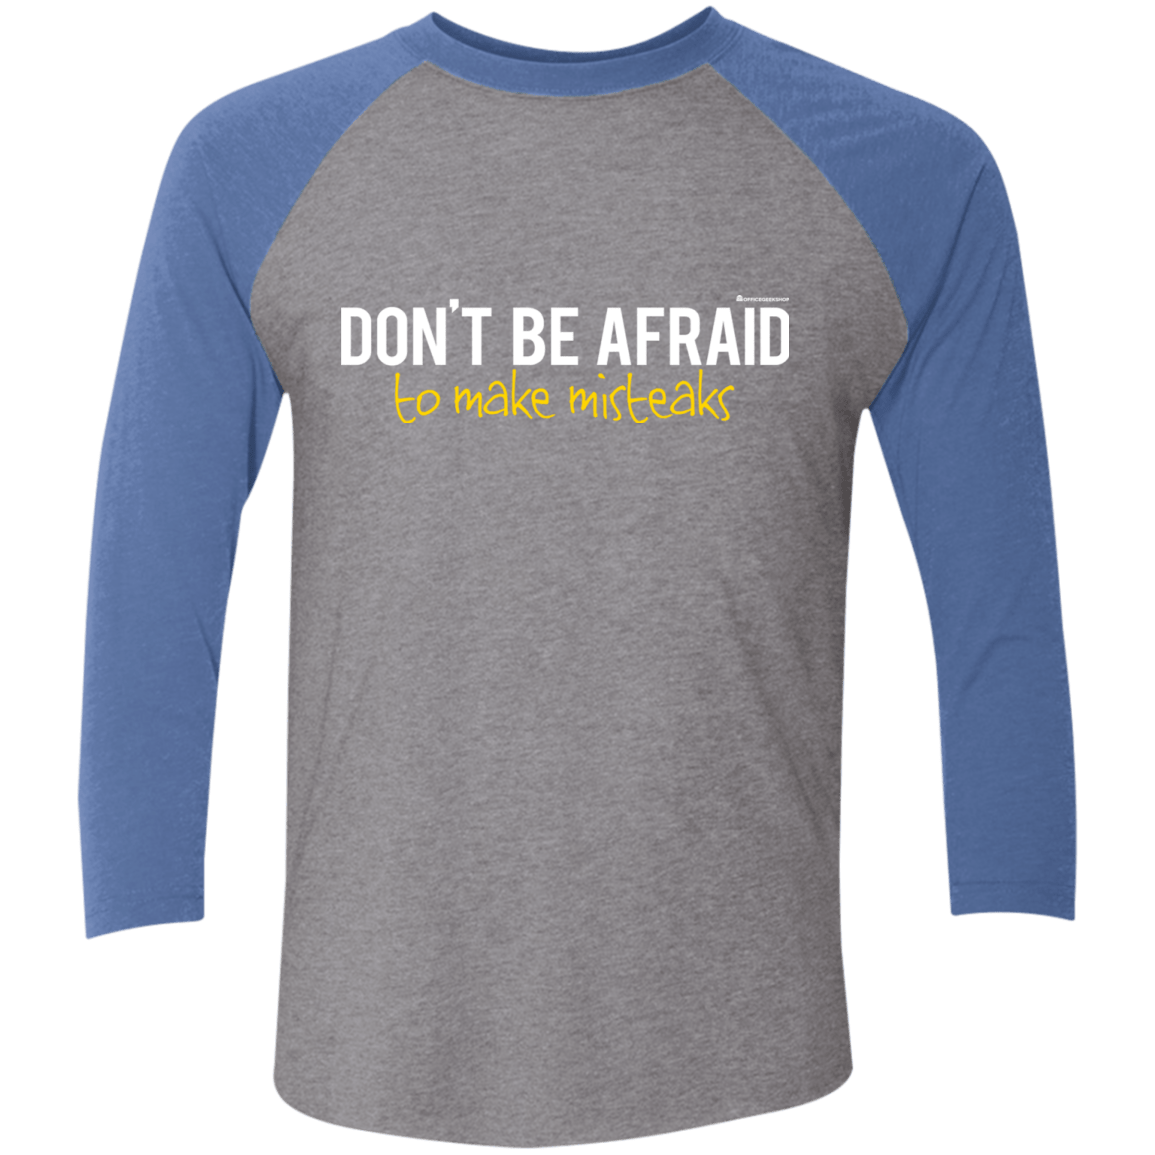 T-Shirts Premium Heather/Vintage Royal / X-Small Don_t Be Afraid To Make Misteaks Men's Triblend 3/4 Sleeve